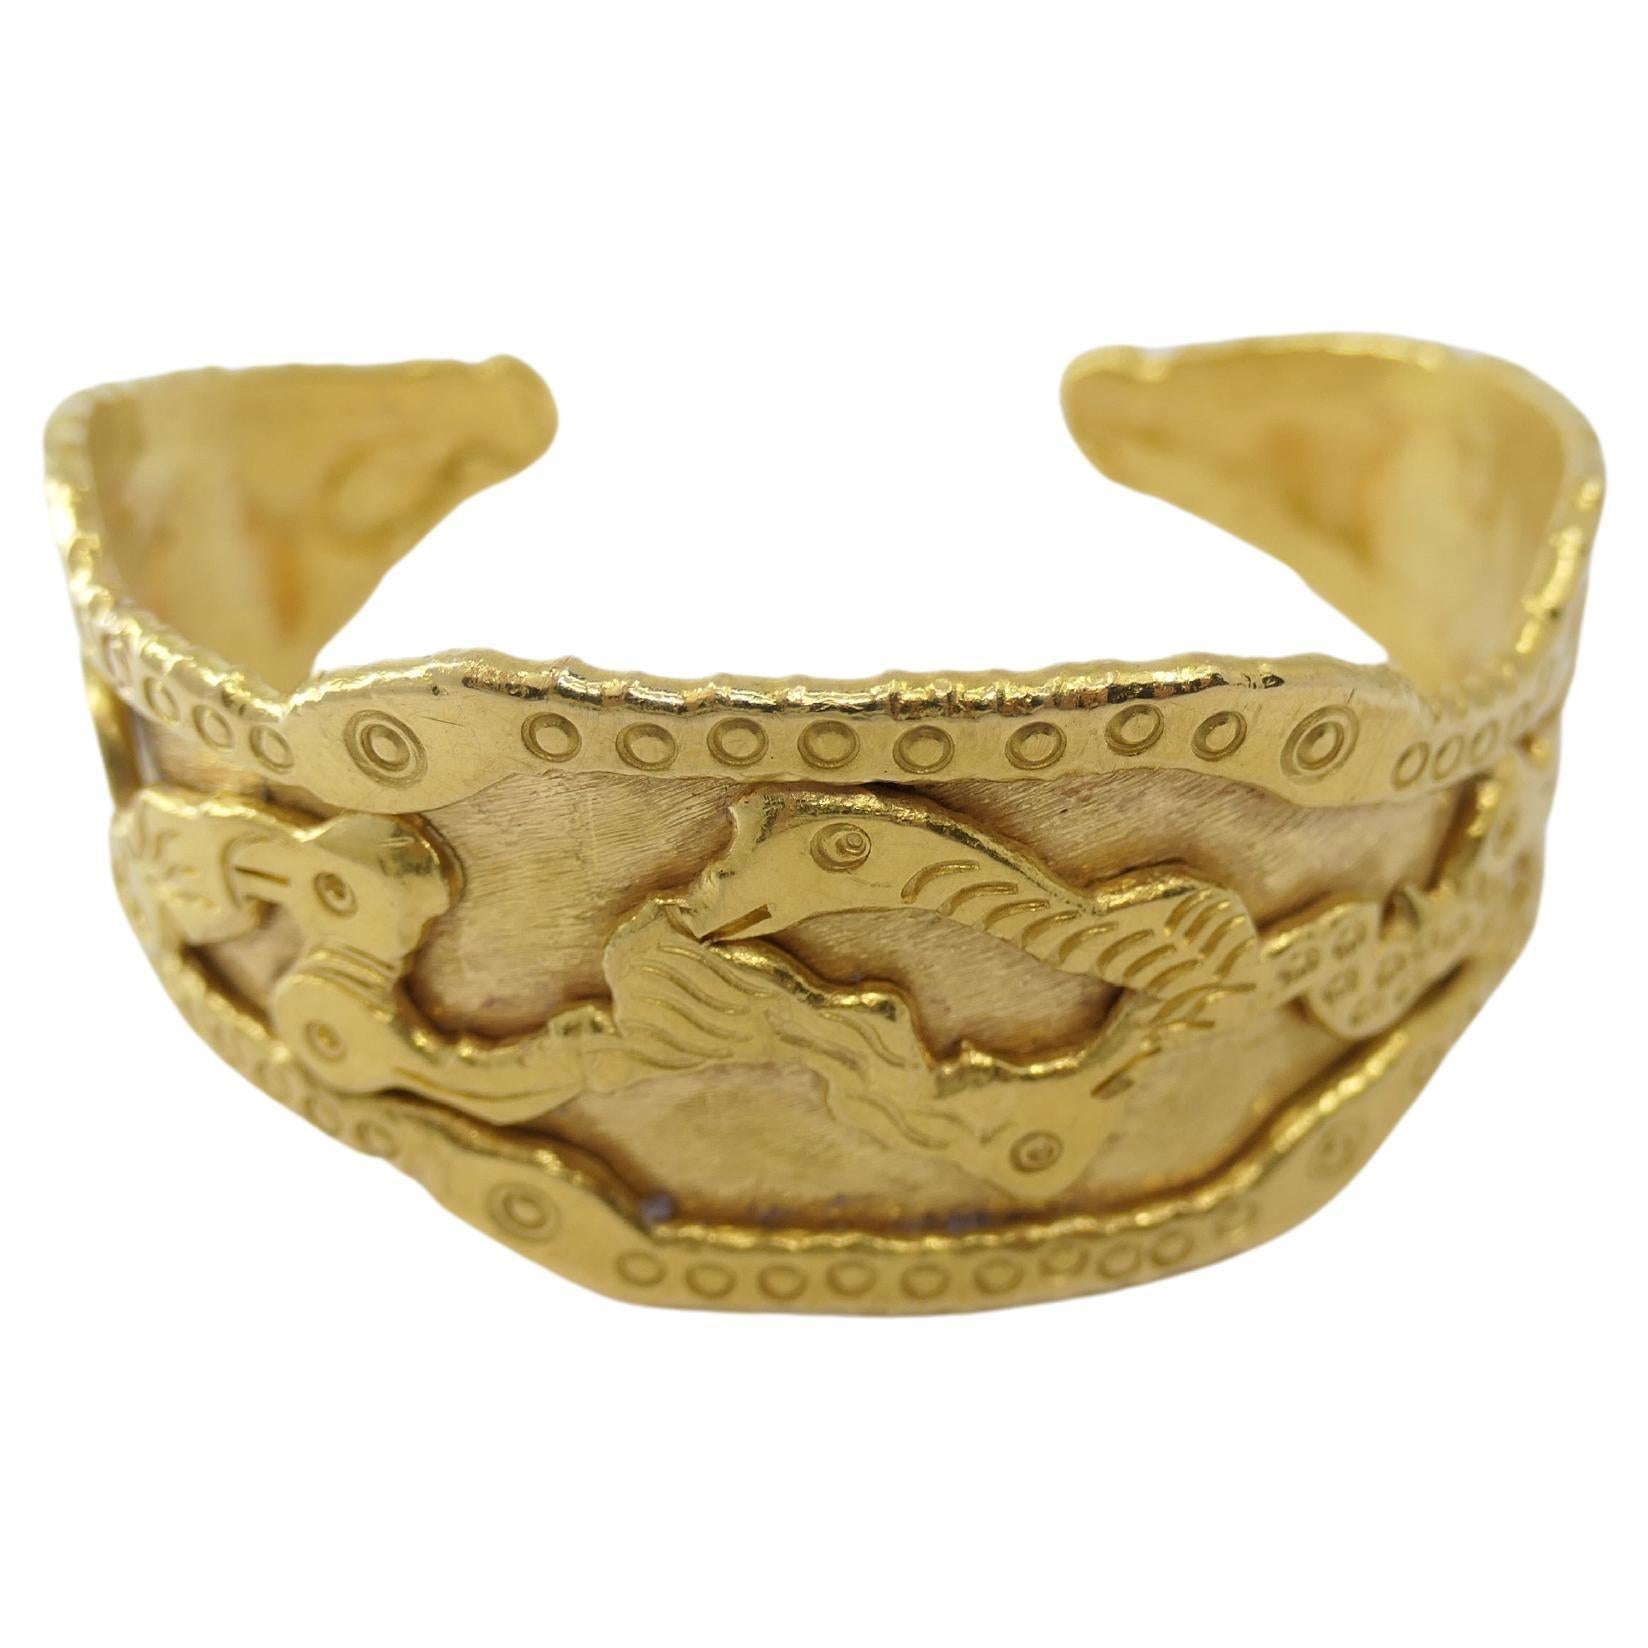 An amazing 22k gold cuff bracelet by Jean Mahie from Charming Monsters collection.
The bracelet has abstract design with the embossed carved  figures that resemble whimsical creatures. The pattern is created in Jean Mahie's artistic signature style